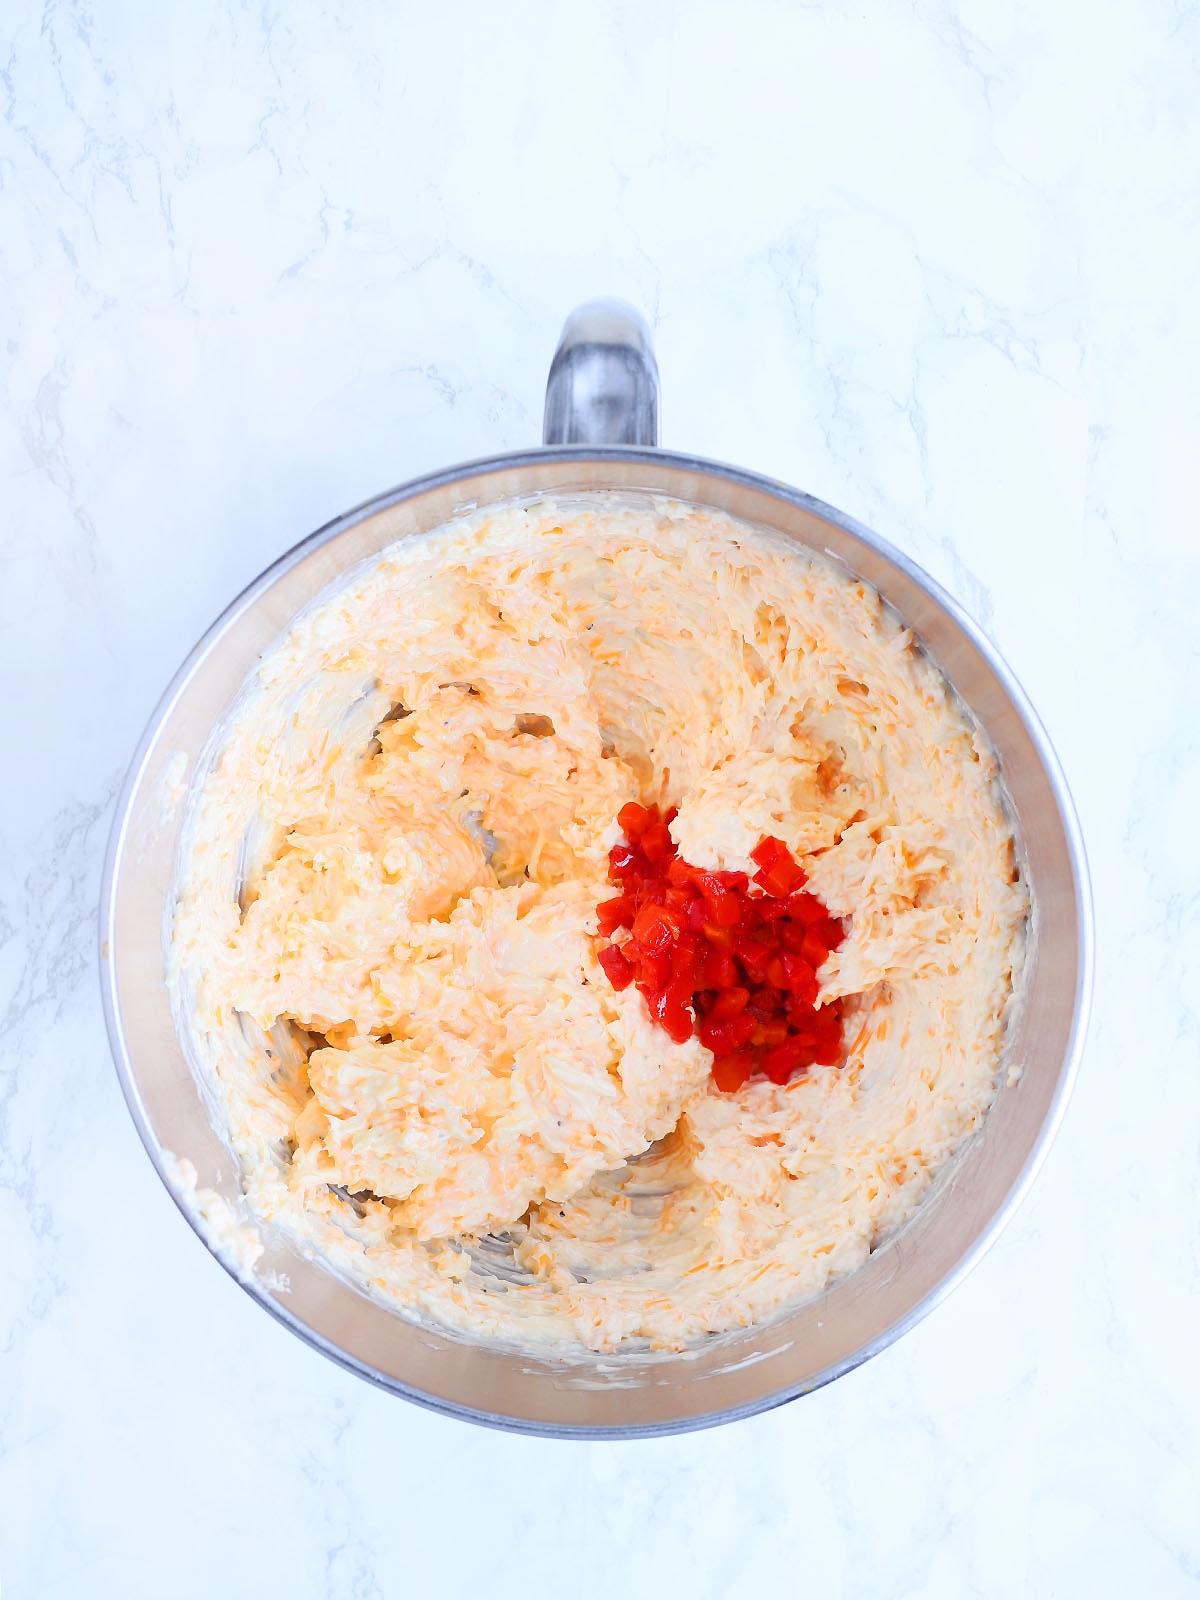 Adding the pimentos to the mixing bowl with the pimento cheese spread.